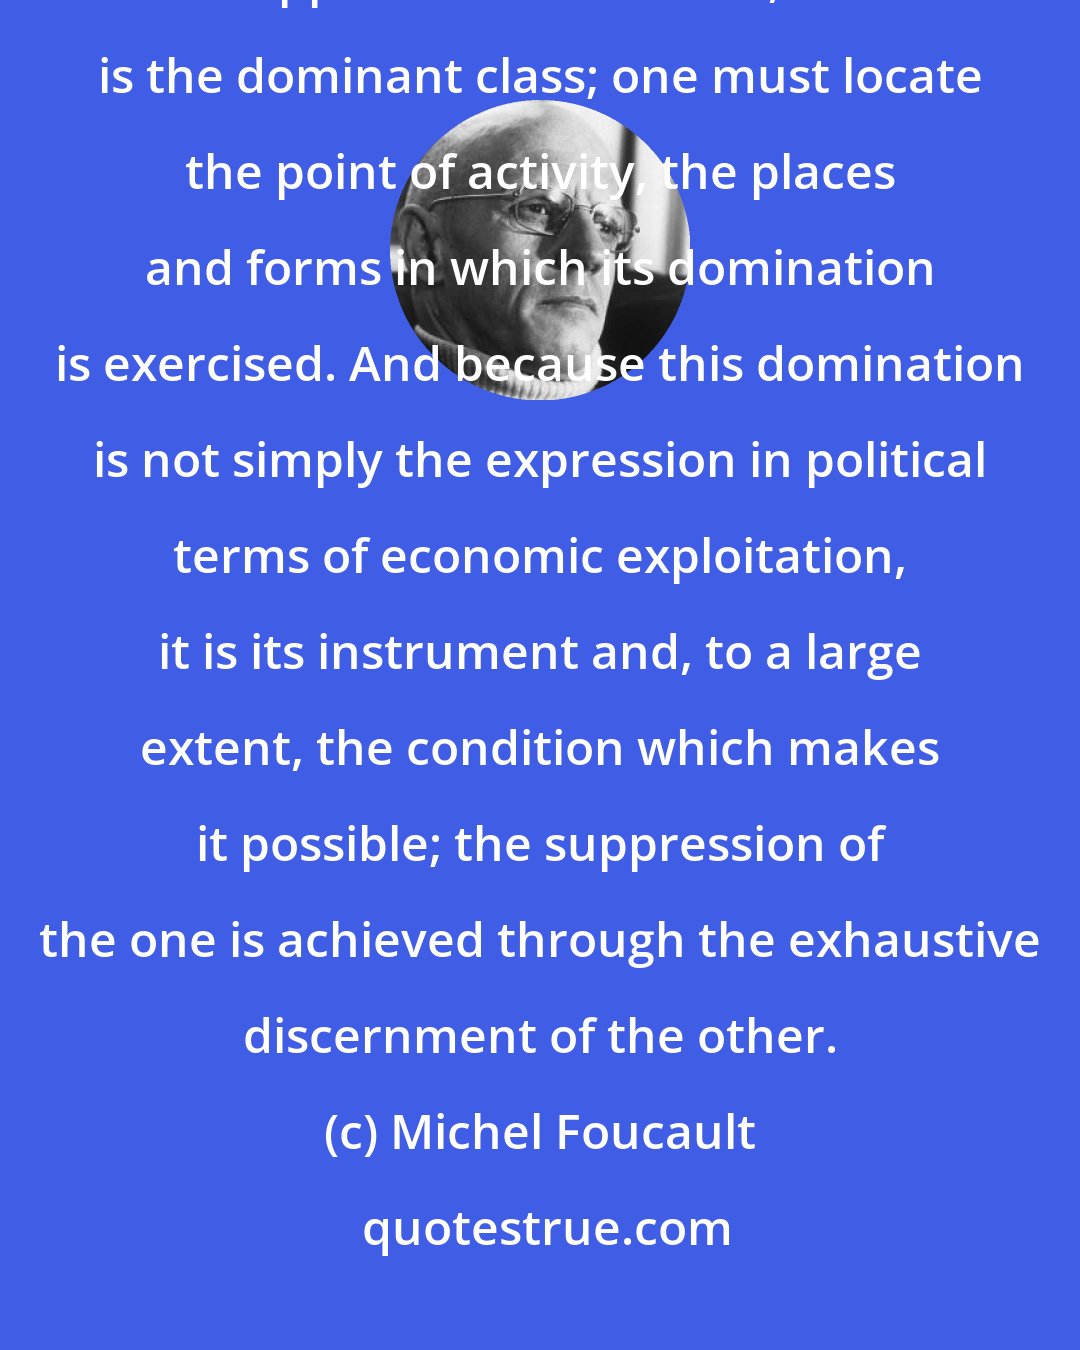 Michel Foucault: Probably it's insufficient to say that behind the governments, behind the apparatus of the State, there is the dominant class; one must locate the point of activity, the places and forms in which its domination is exercised. And because this domination is not simply the expression in political terms of economic exploitation, it is its instrument and, to a large extent, the condition which makes it possible; the suppression of the one is achieved through the exhaustive discernment of the other.